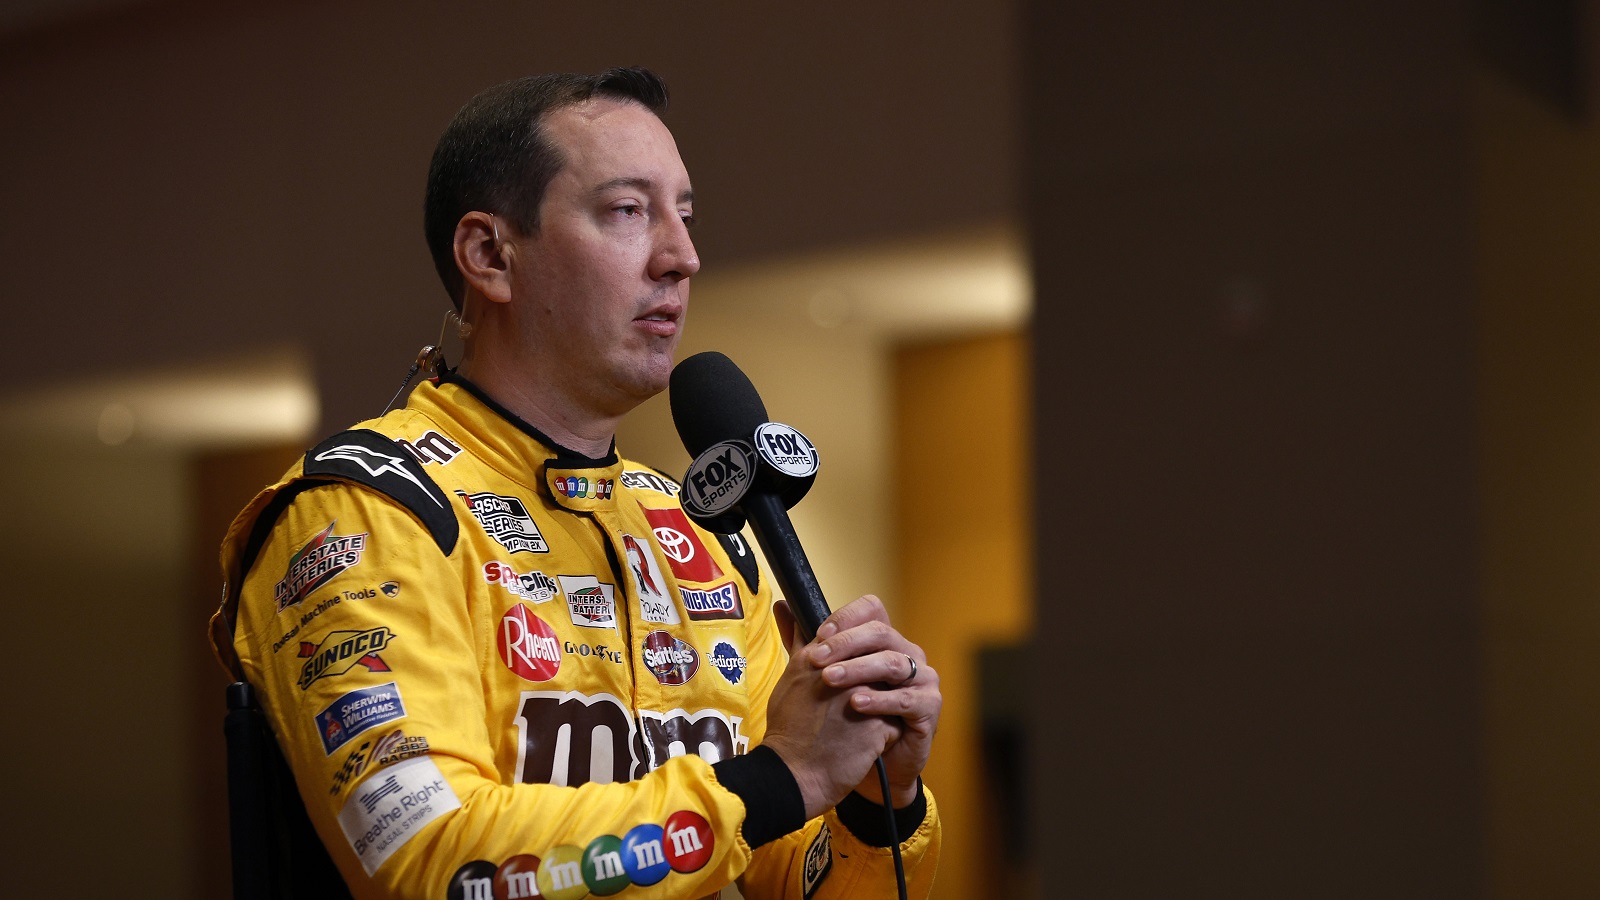 NASCAR driver Kyle Busch speaks with reporters during the NASCAR Cup Series Playoff Media Day at Charlotte Convention Center on Sept. 1, 2022.